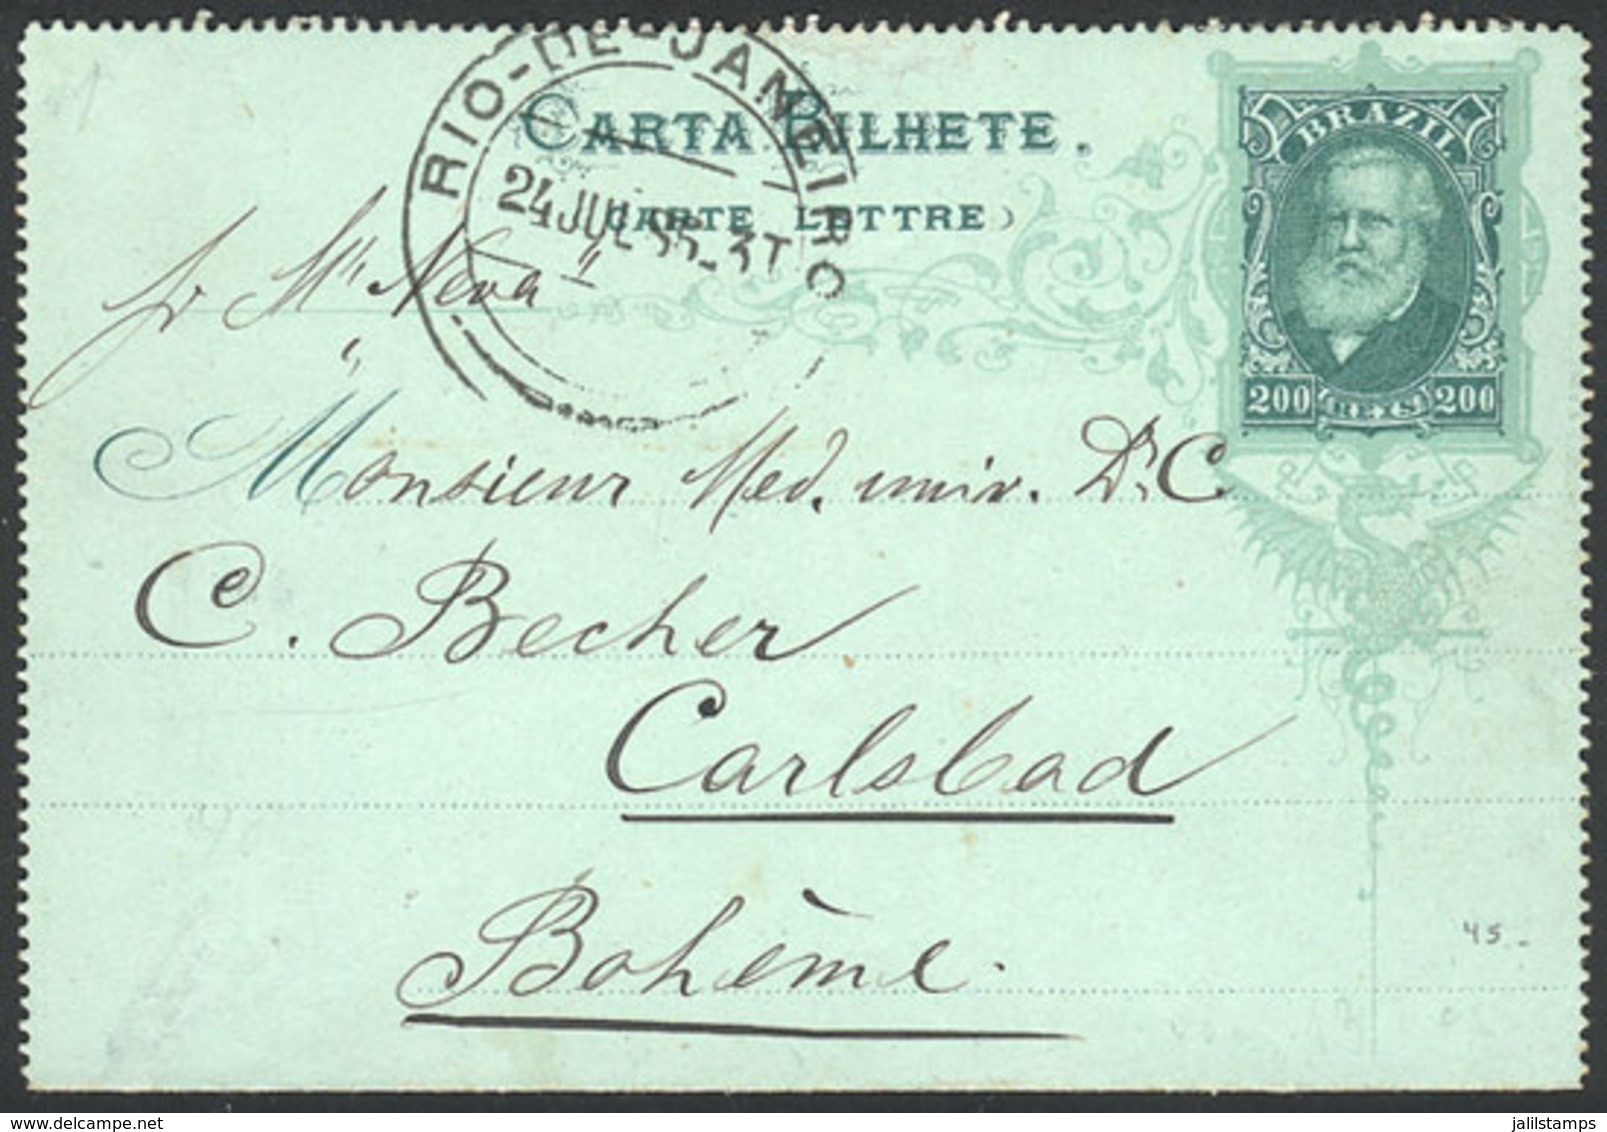 BRAZIL: RHM.CB-16, Used Lettercard, Very Fine Quality, Catalog Value 1,900Rs., Low Start! - Entiers Postaux